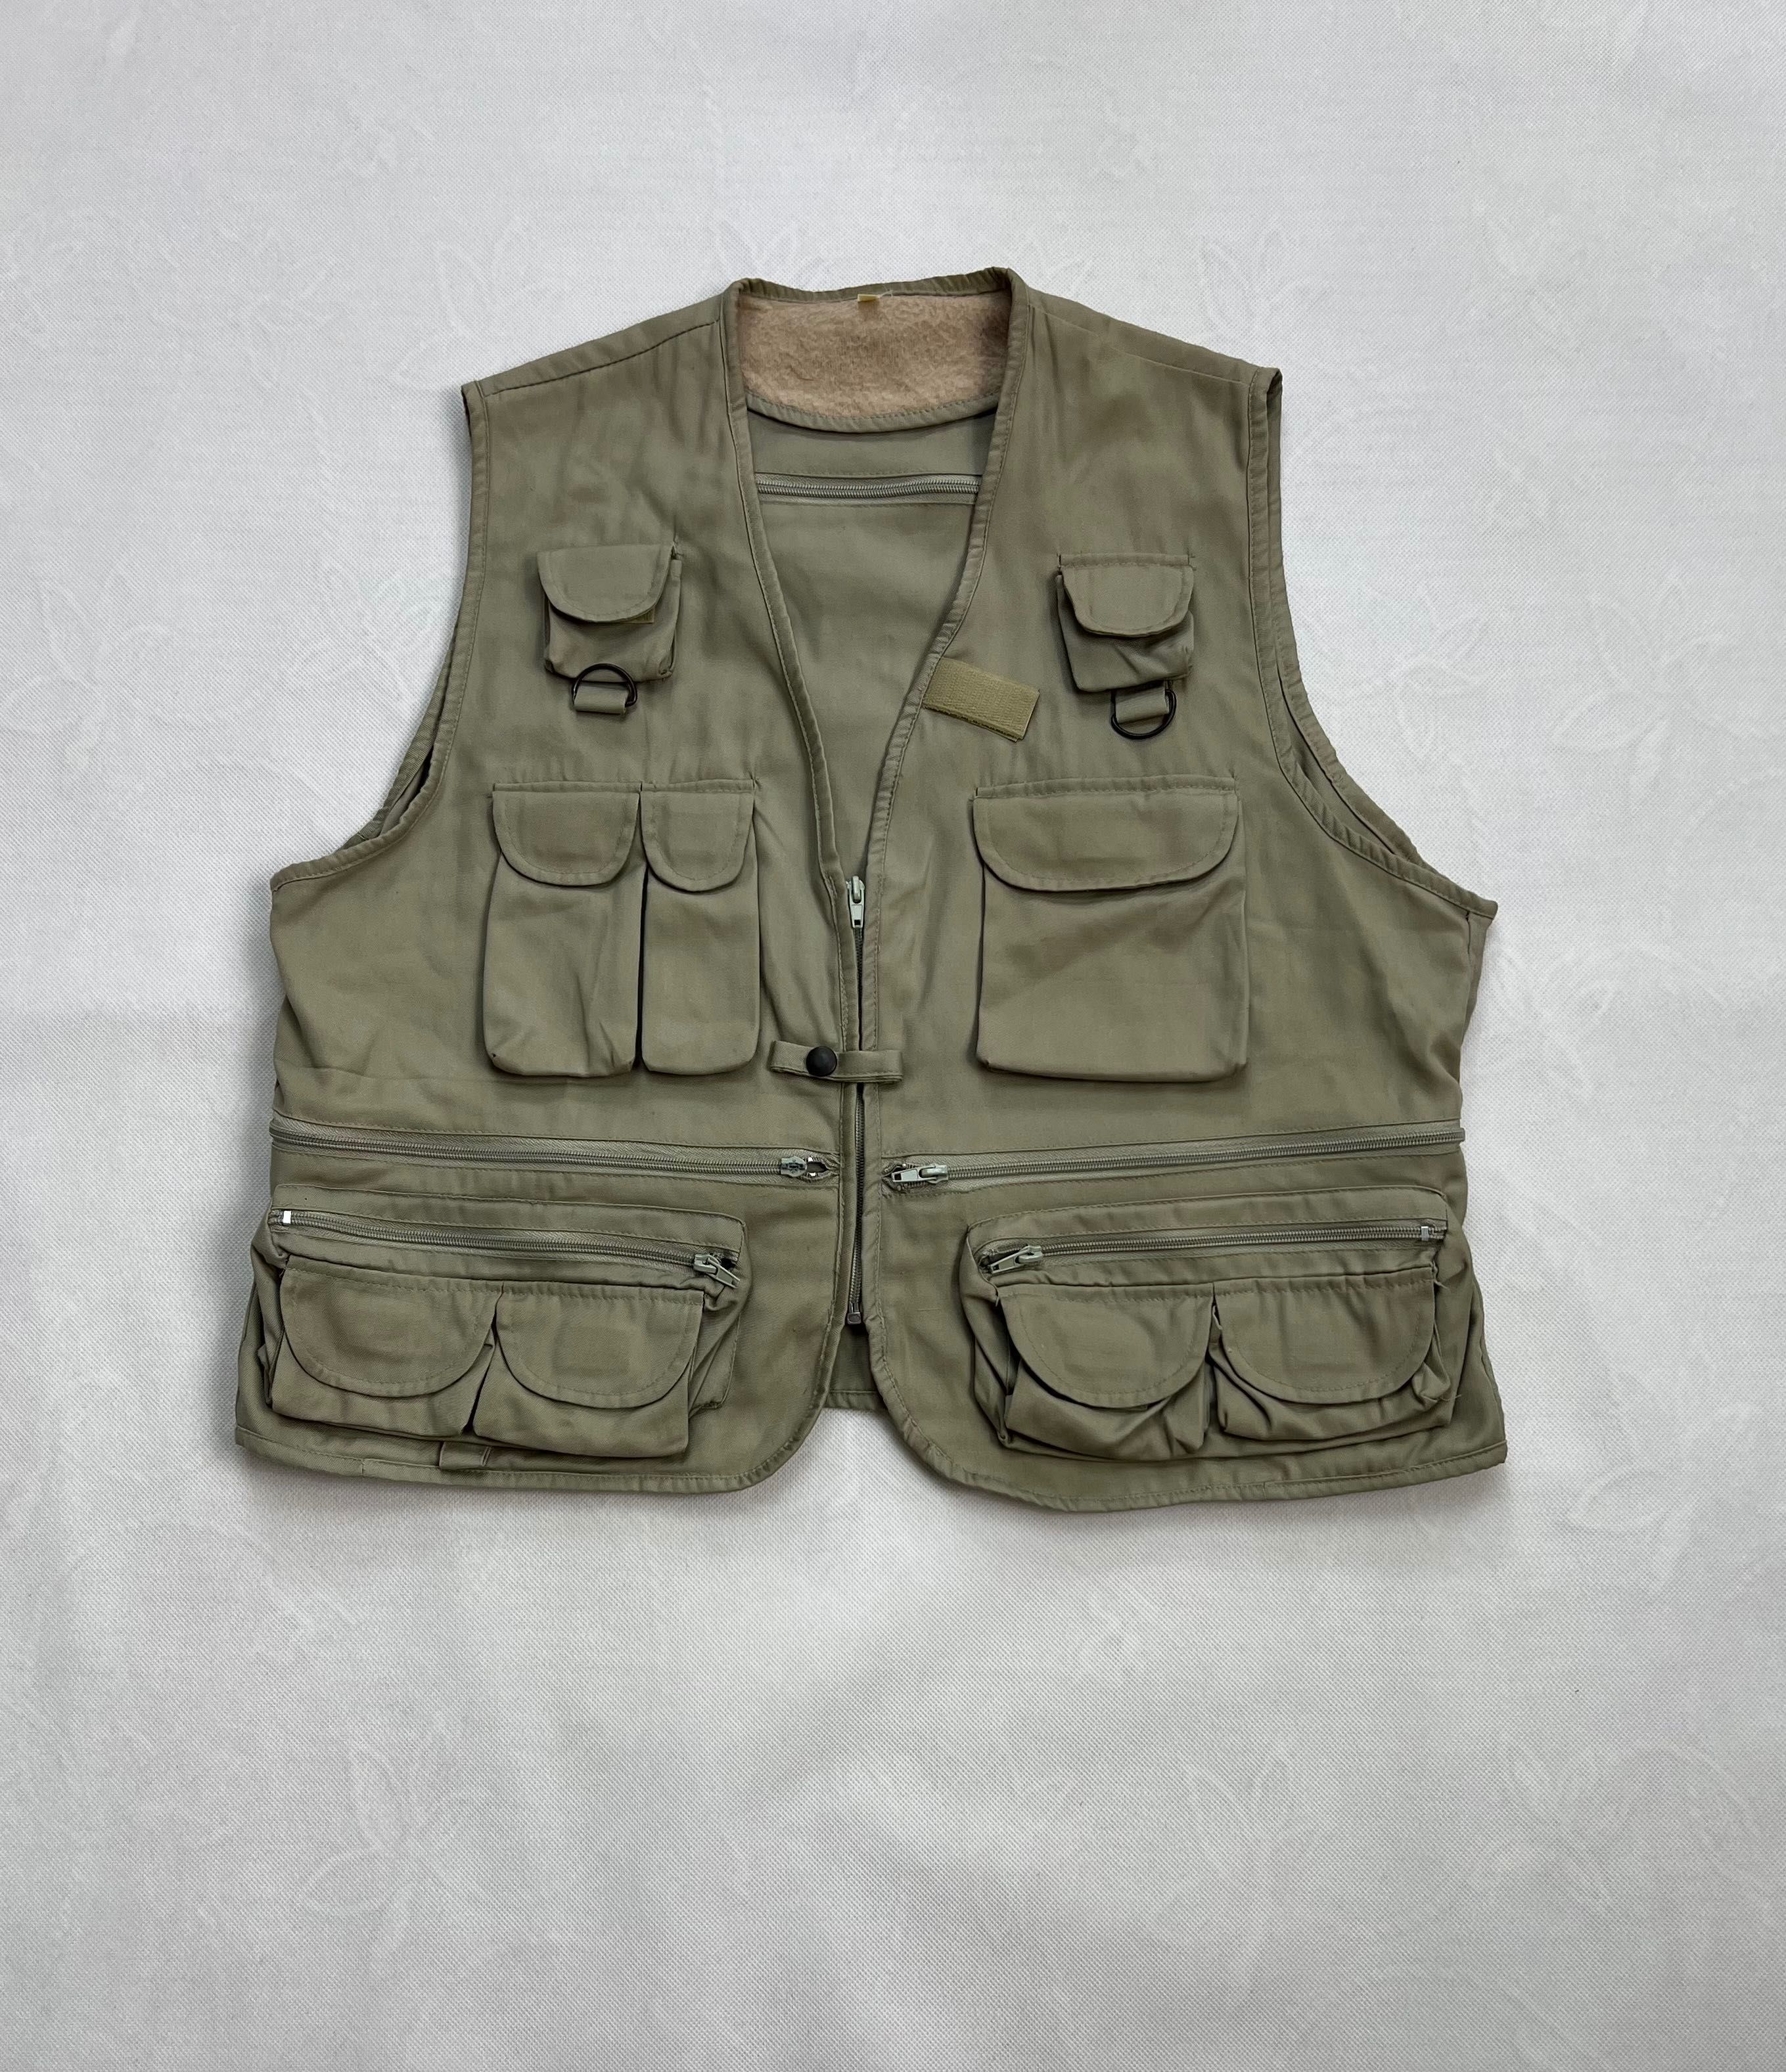 Tactical Kamizelka Army Military multi pocket vintage 90’s boxy fit